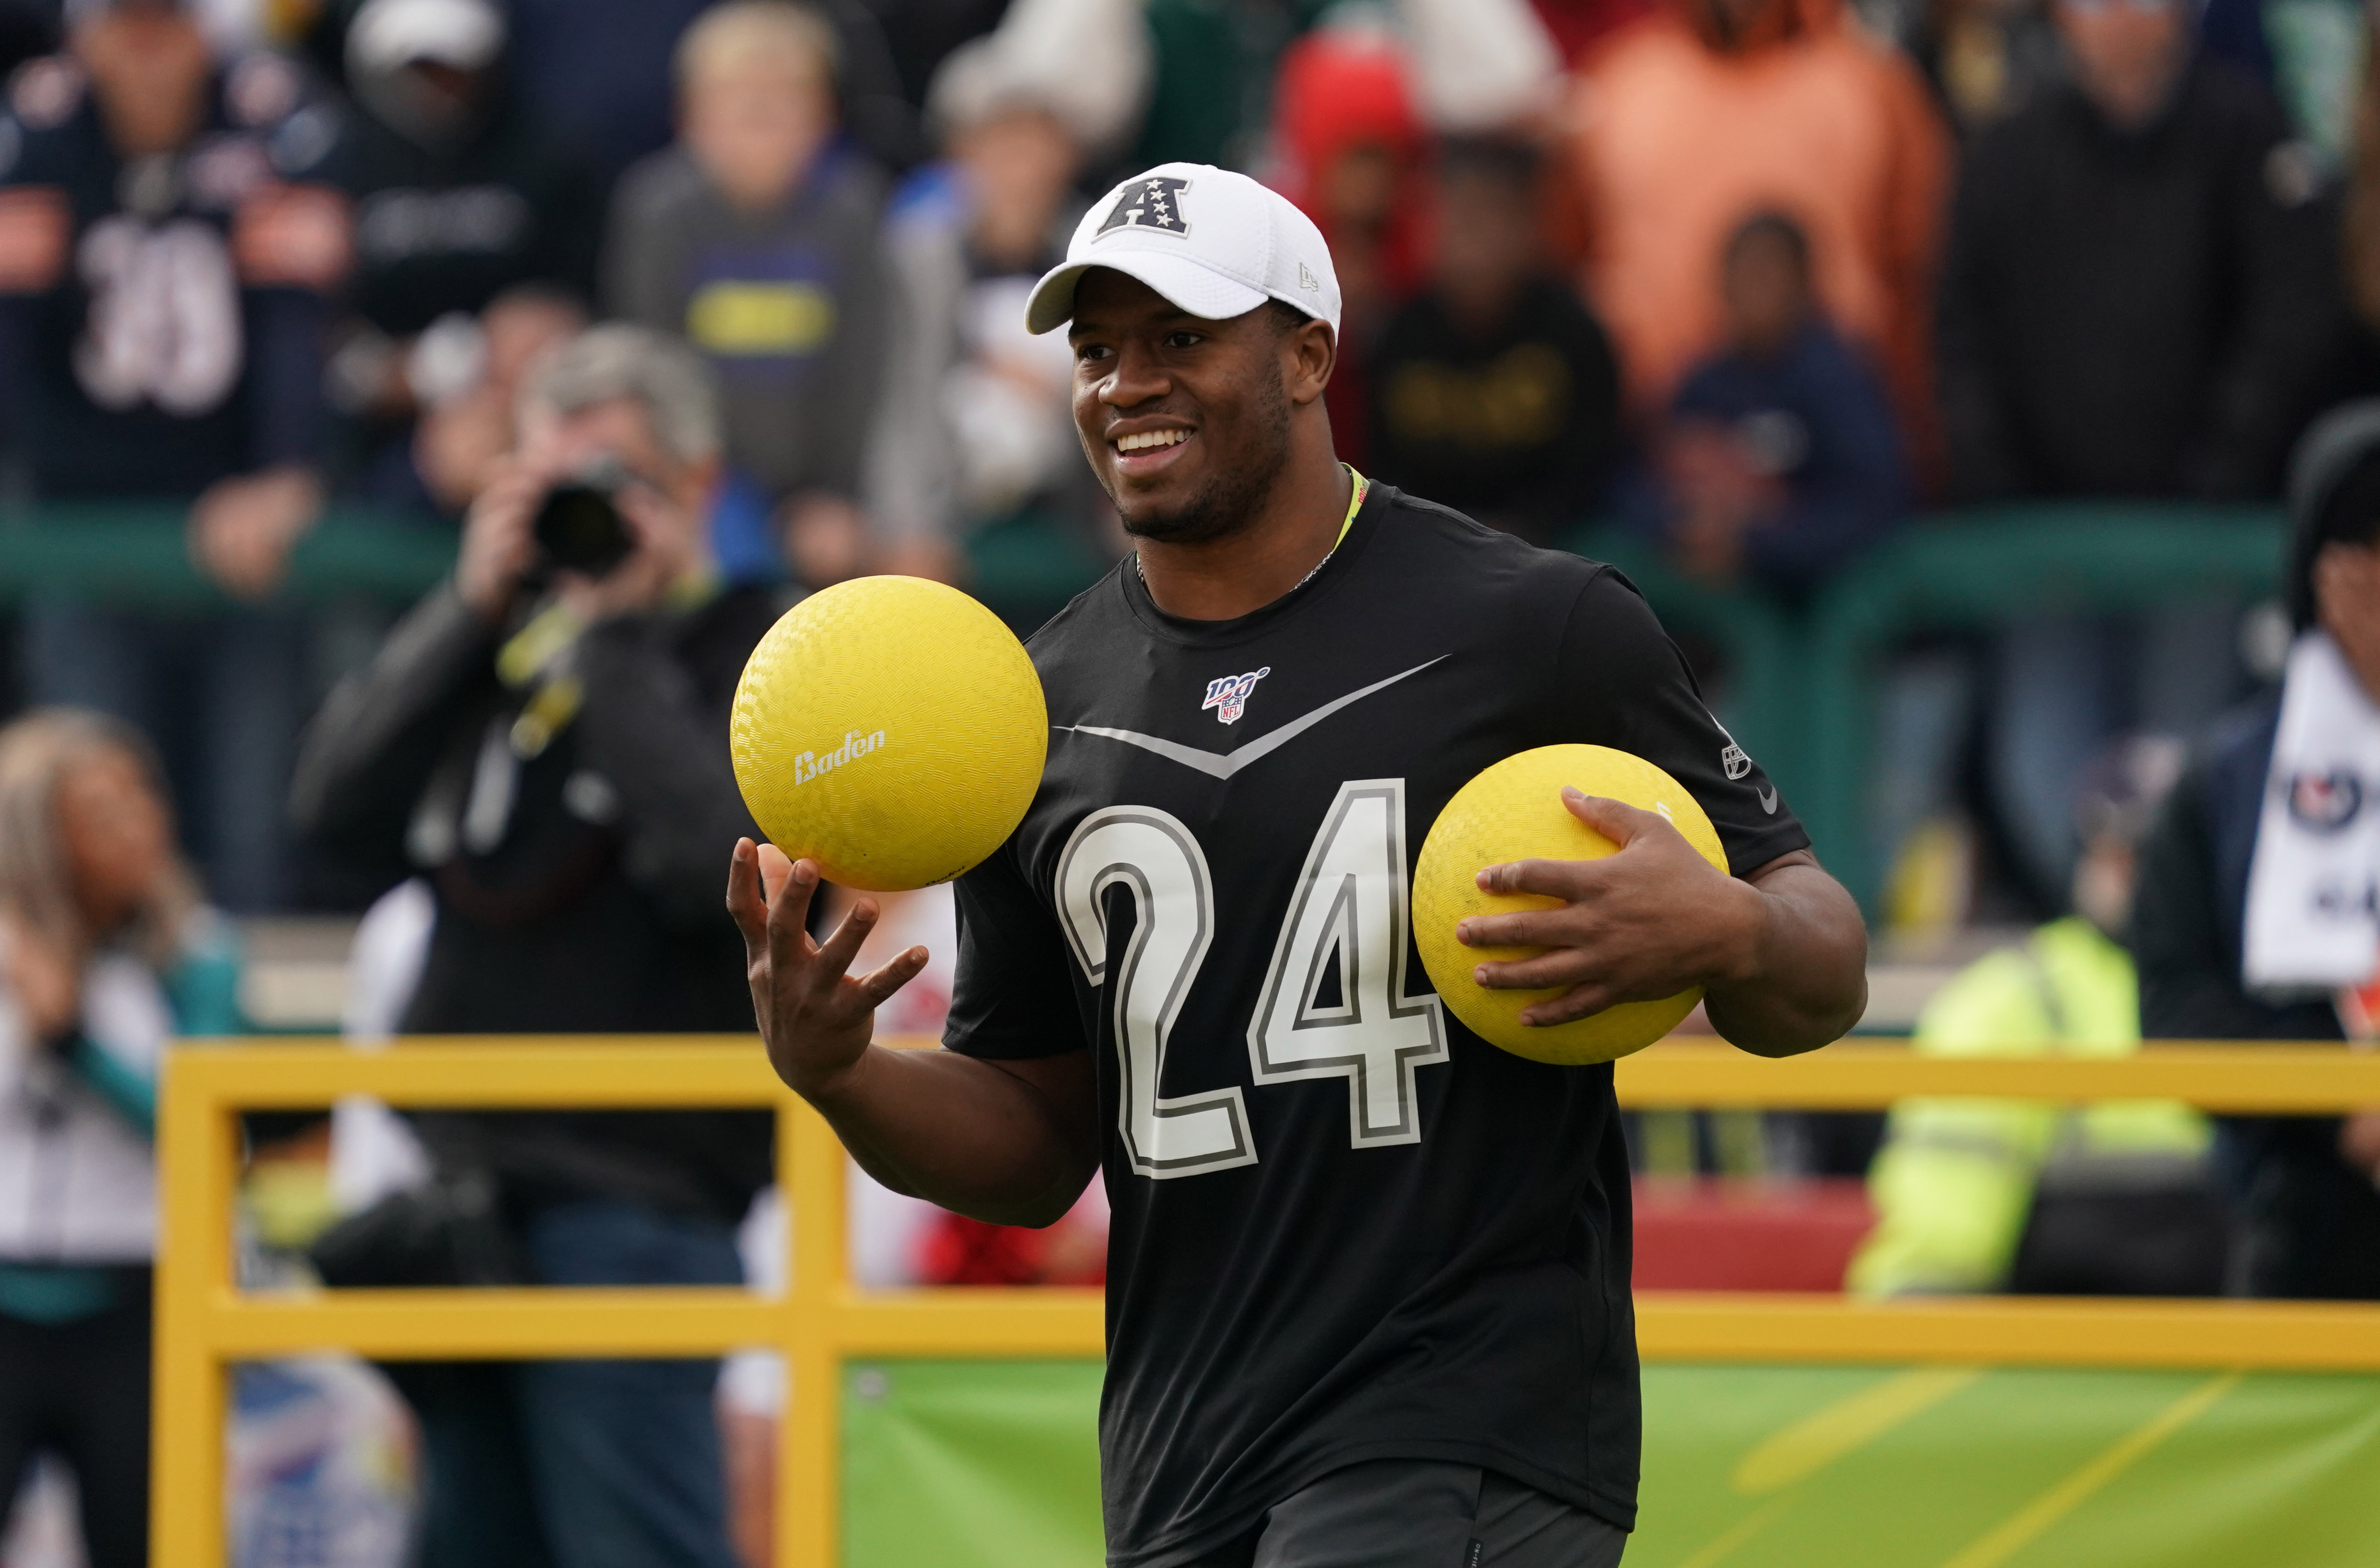 Cleveland Browns running back Nick Chubb (24) during the dodgeball competition at the Pro Bowl Skills Showdown at ESPN Wide World of Sports.